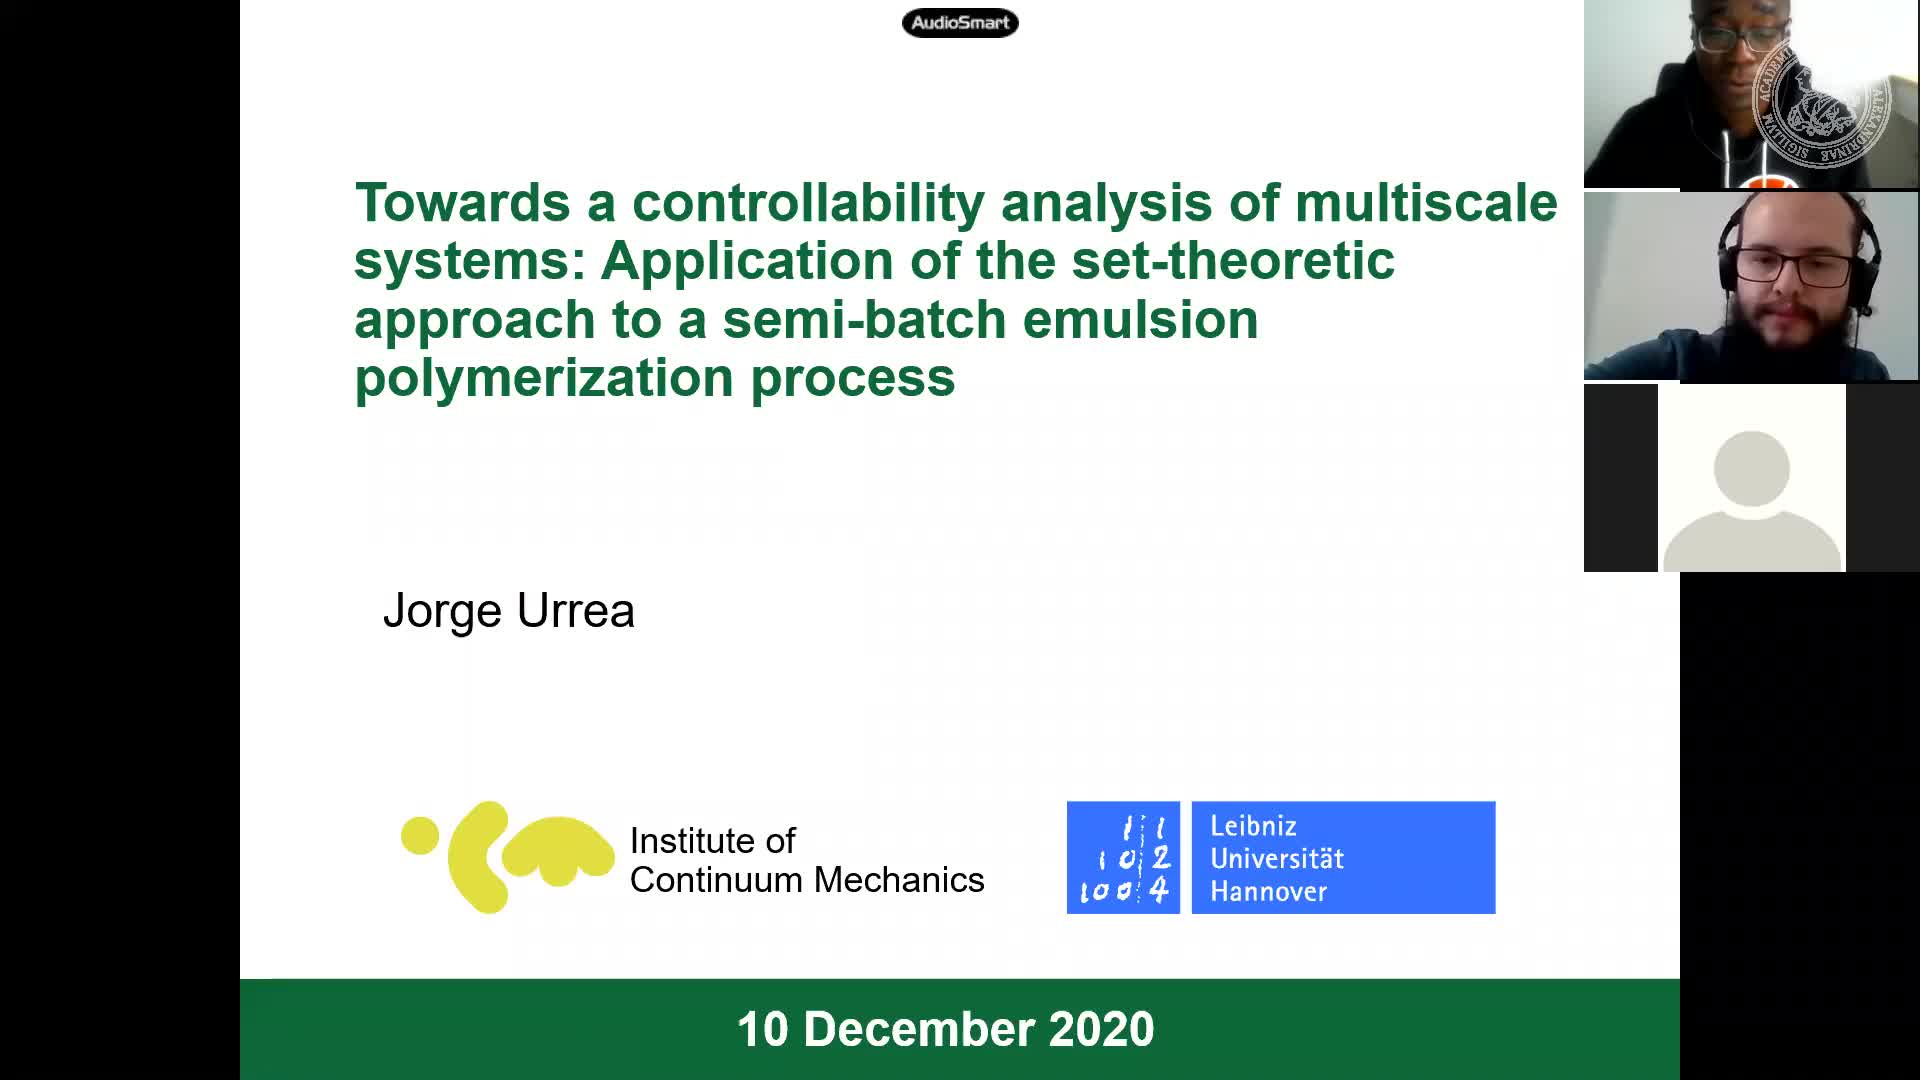 Towards a controllability analysis of multiscale systems: Application of the set-theoretic approach to a semi-batch emulsion polymerization process (Jorge Urrea, Leibniz University Hannover and Universidad de Antioquia) preview image